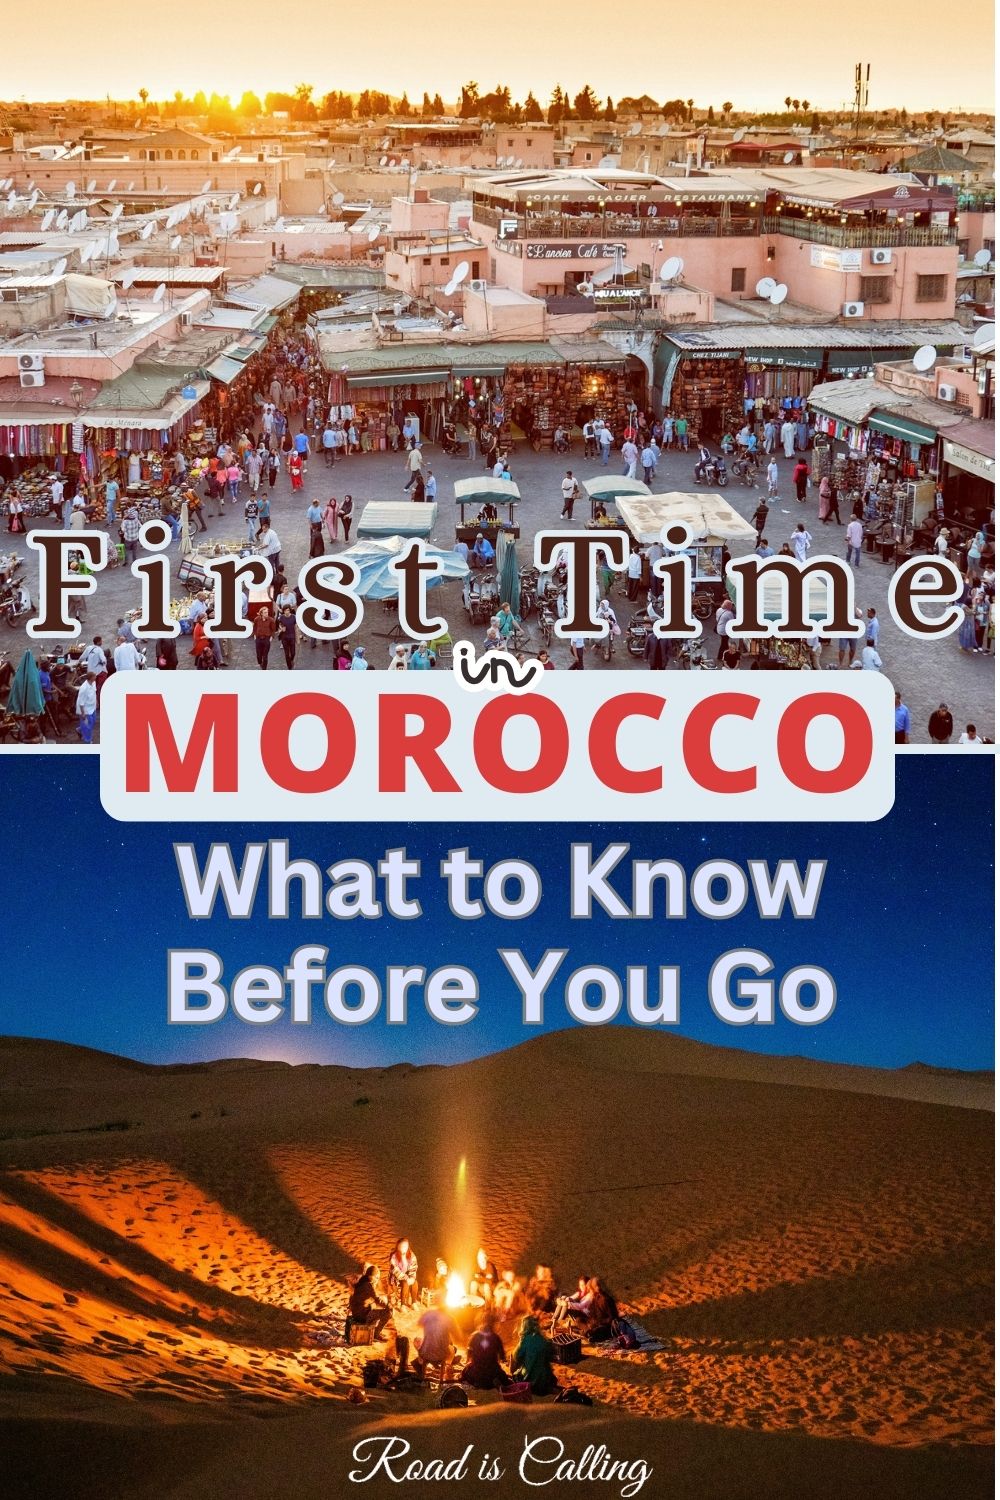 things to know about Morocco before going